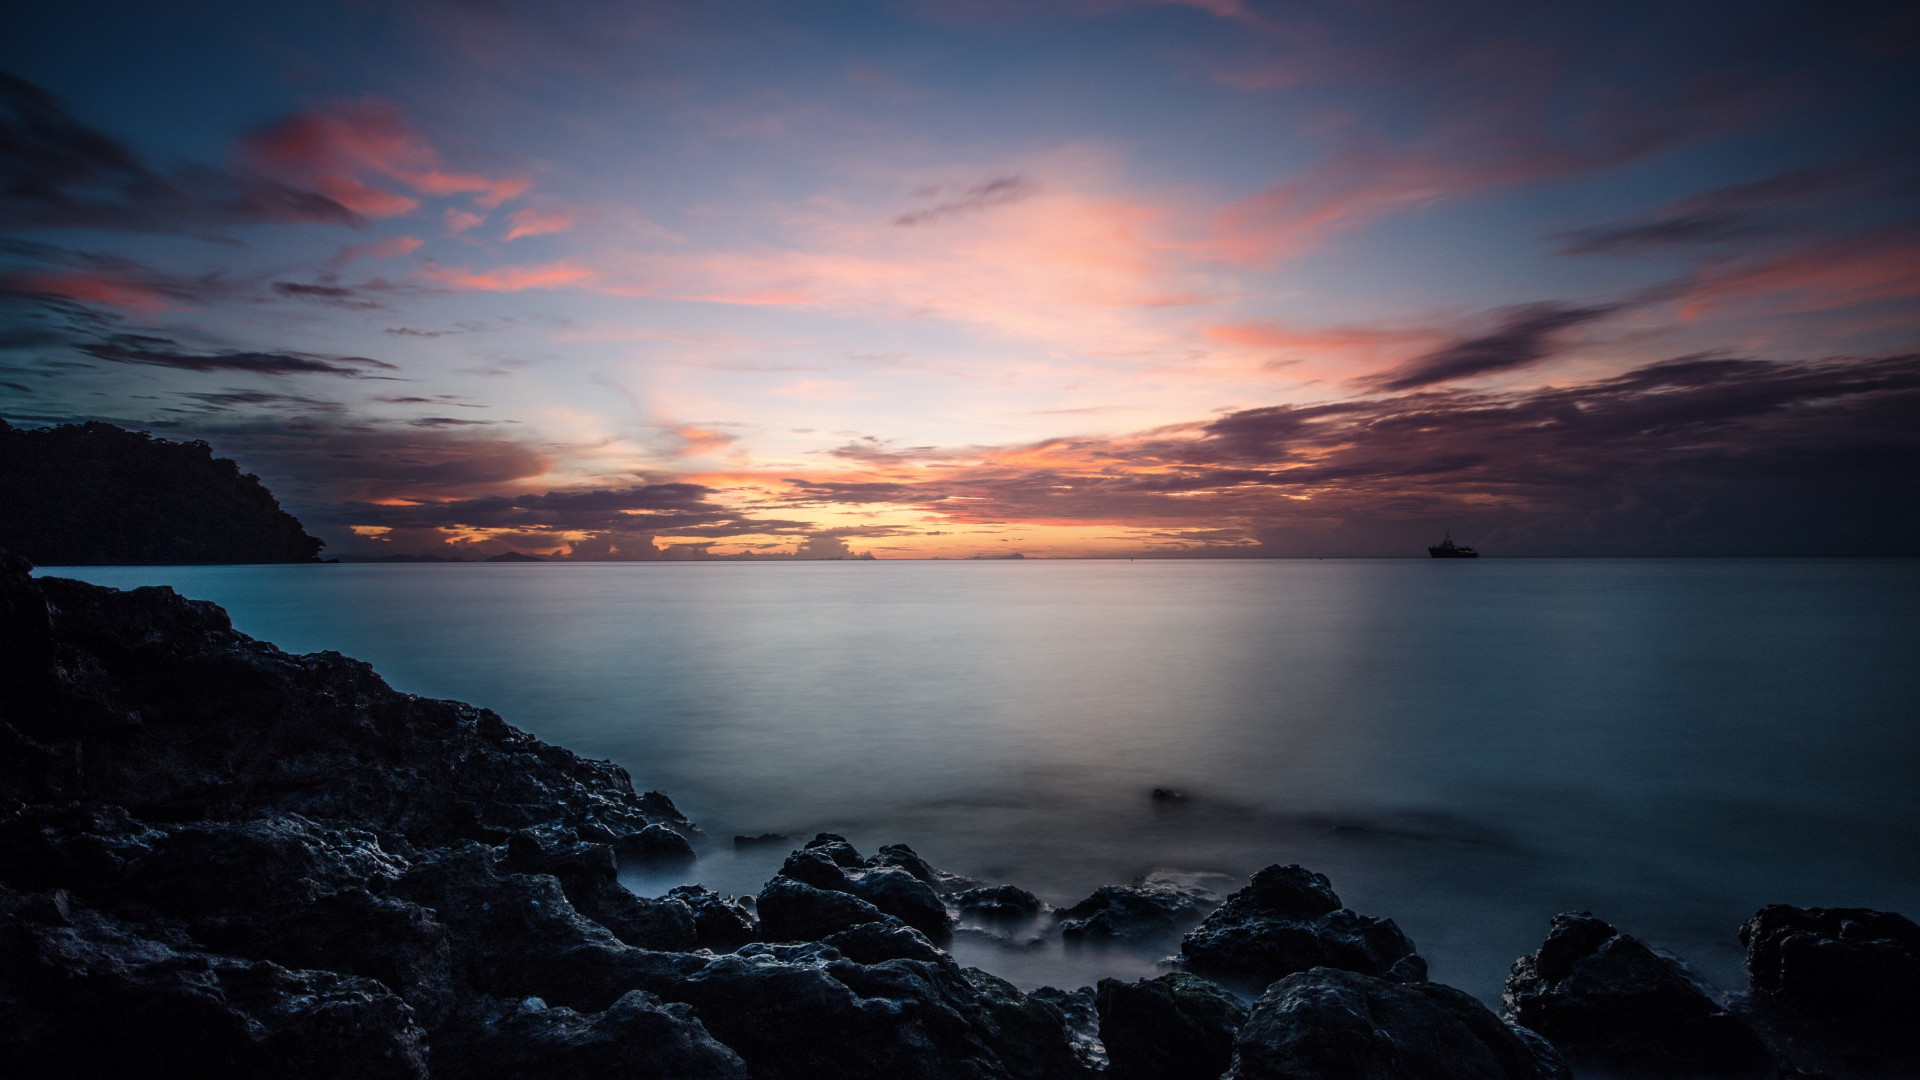 Sunset, rocks, clouds, view from Thailand wallpaper 1920x1080